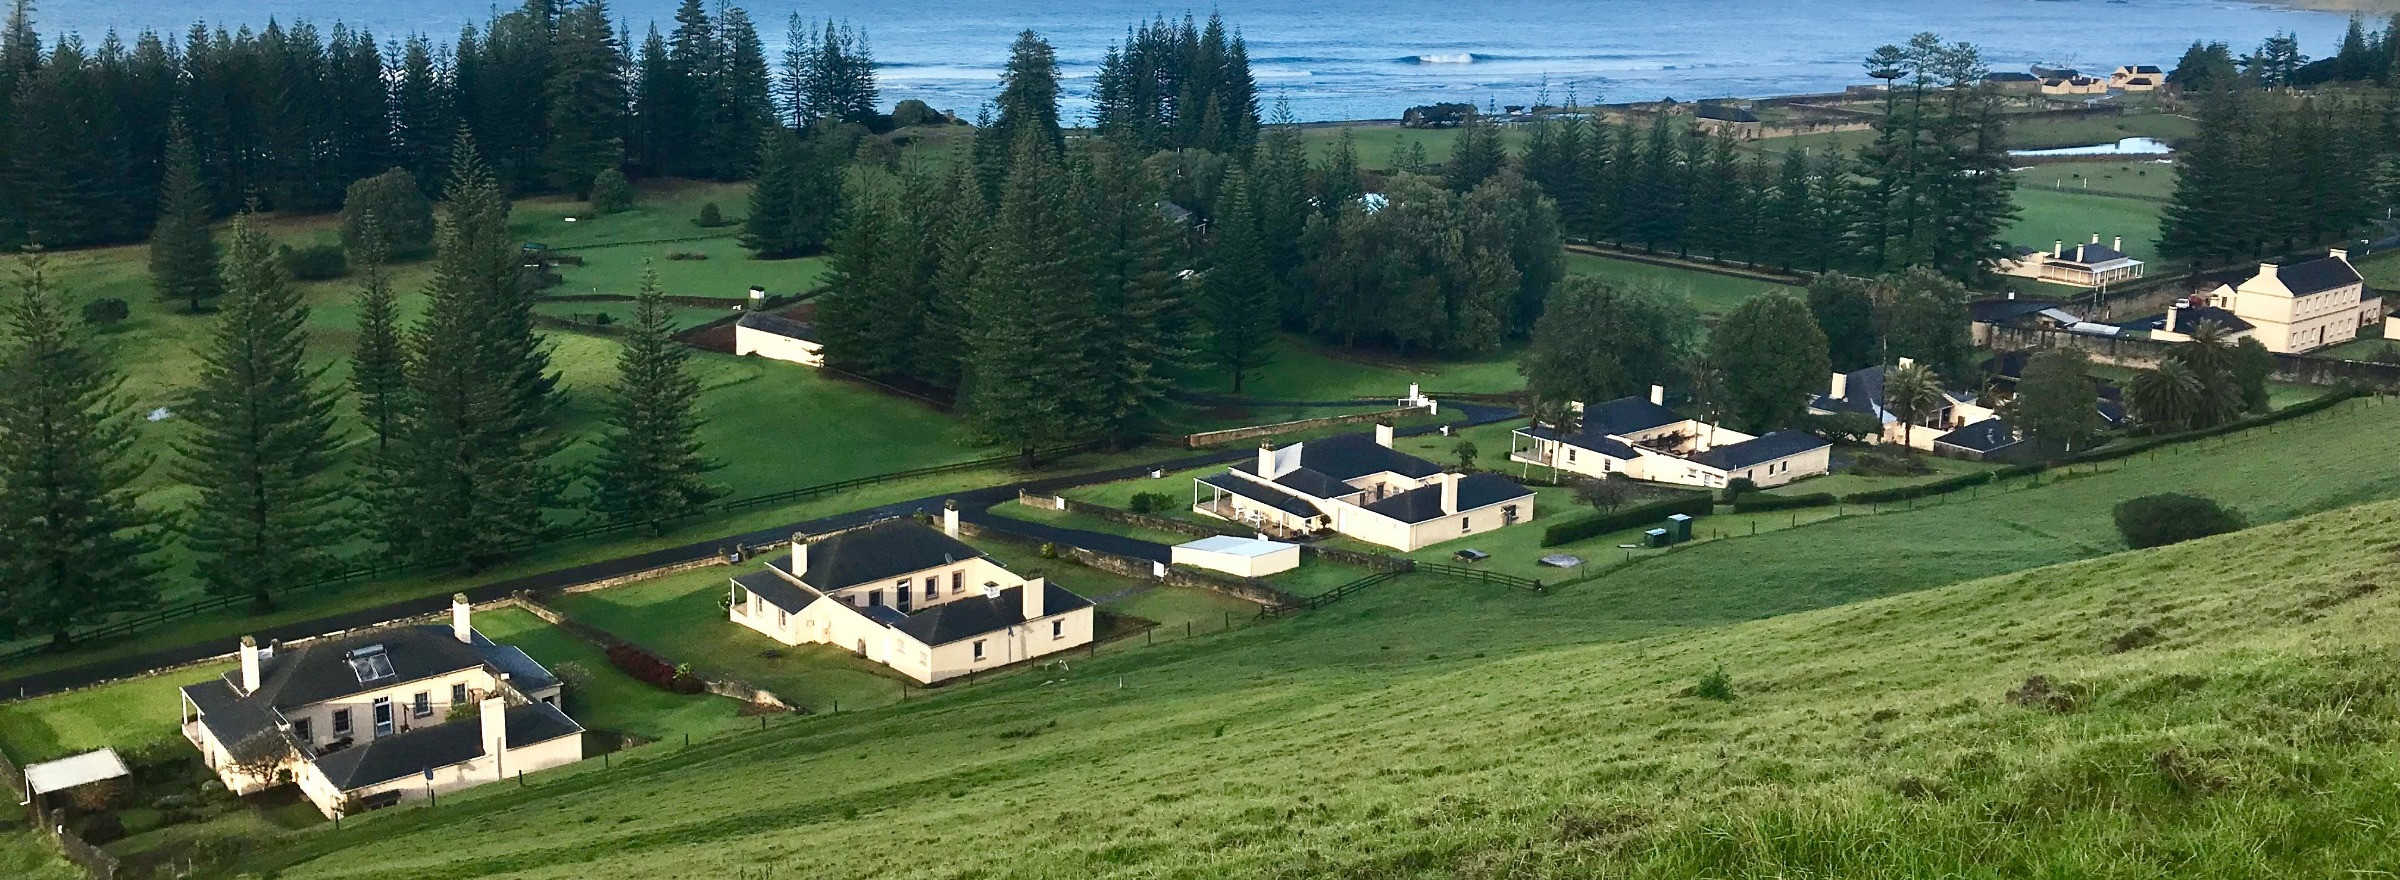 Guide to Planning a Norfolk Island Holiday